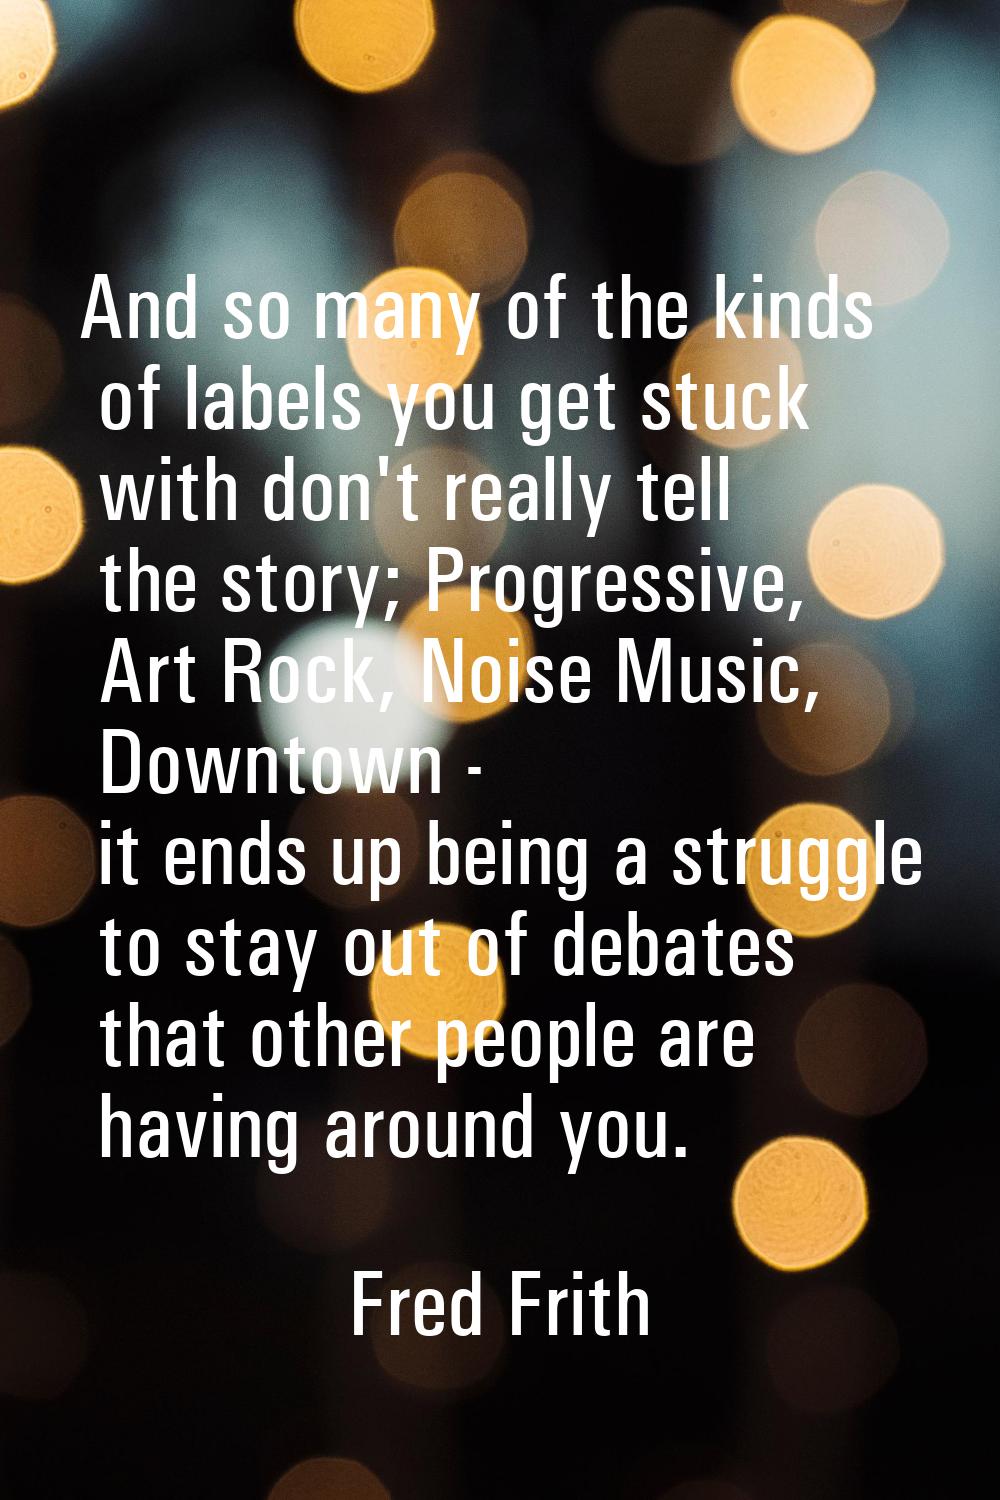 And so many of the kinds of labels you get stuck with don't really tell the story; Progressive, Art